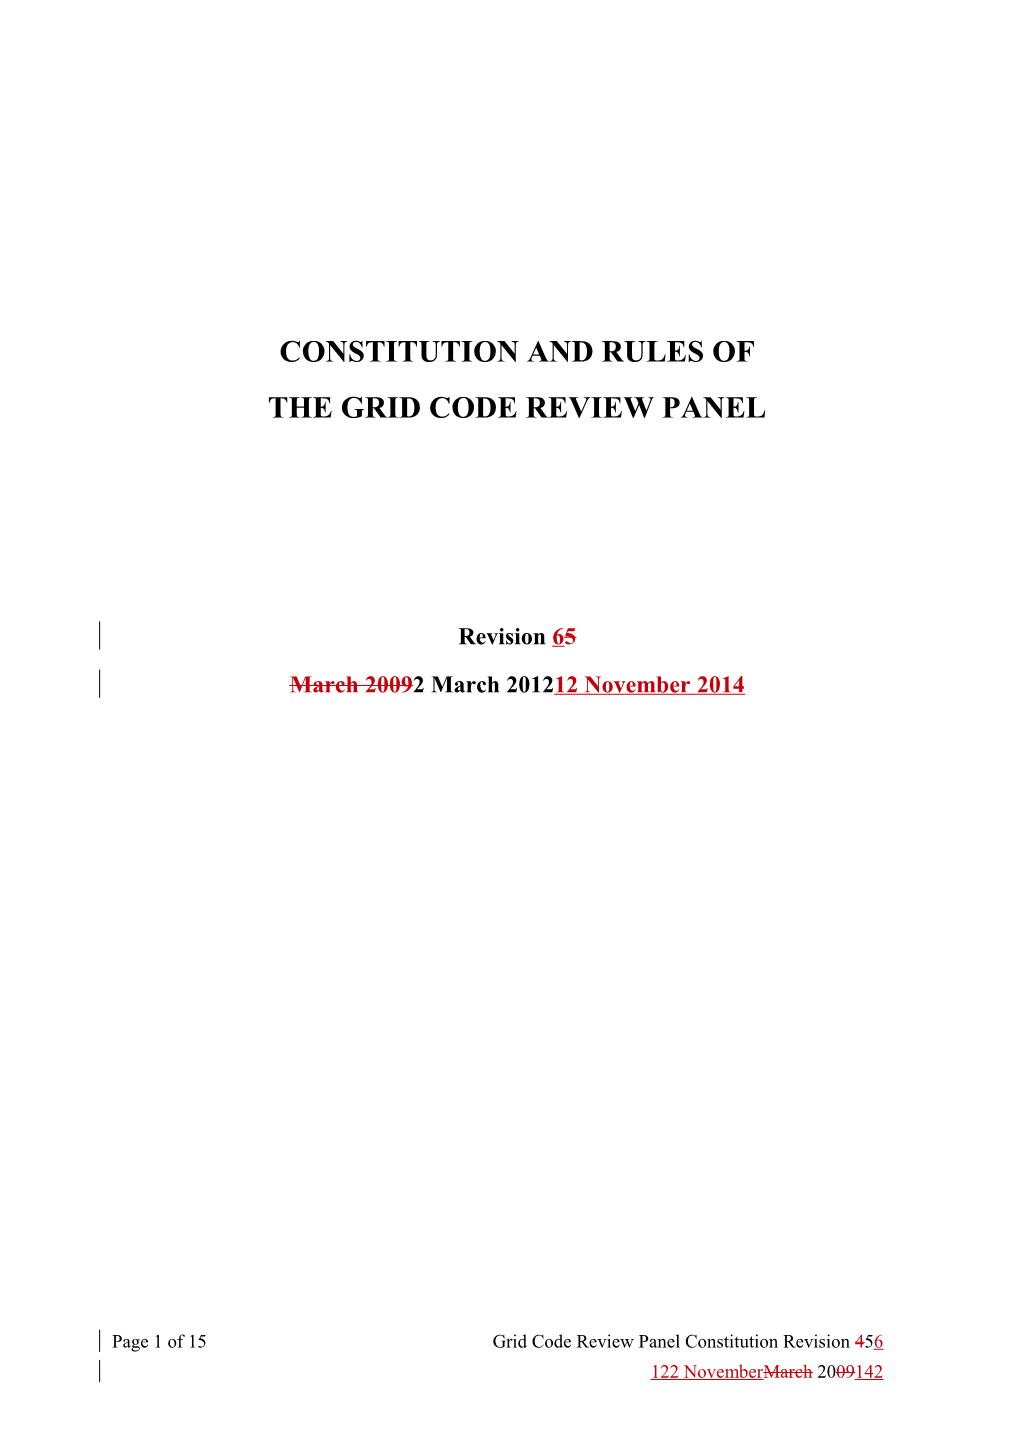 Grid Code Review Panel Constitution